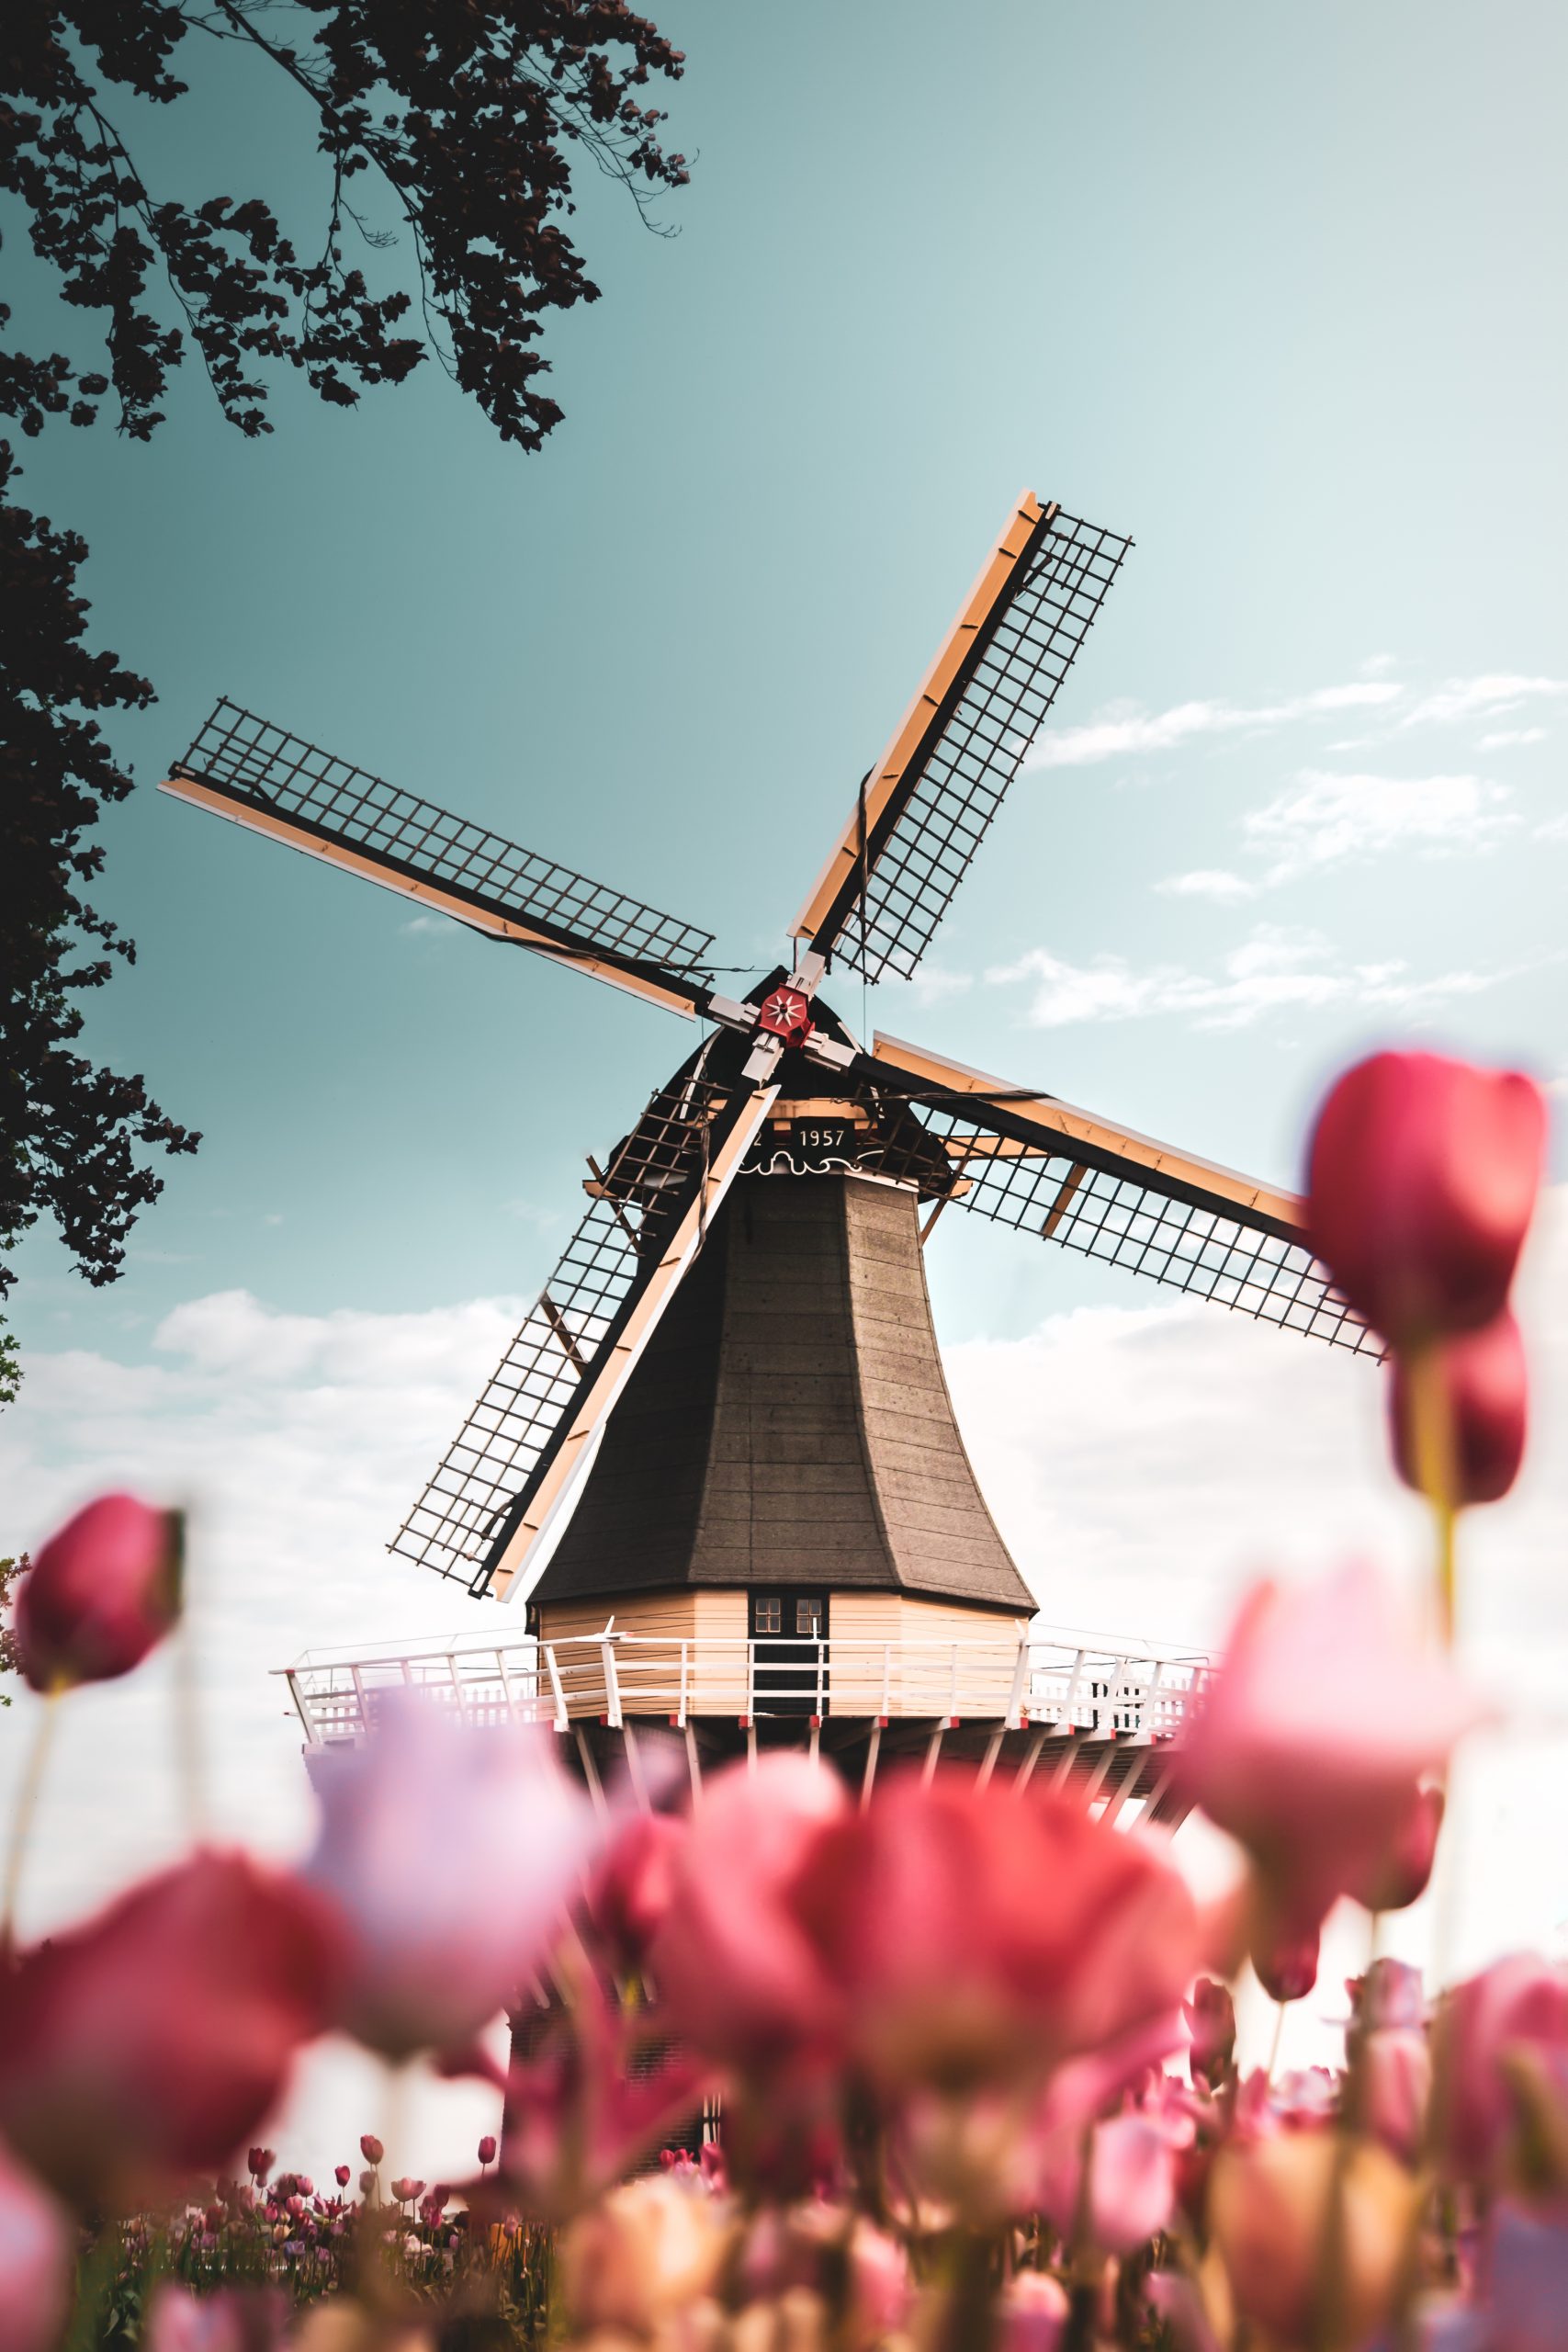 Windmill in a field of tulips in the Netherlands, Europe